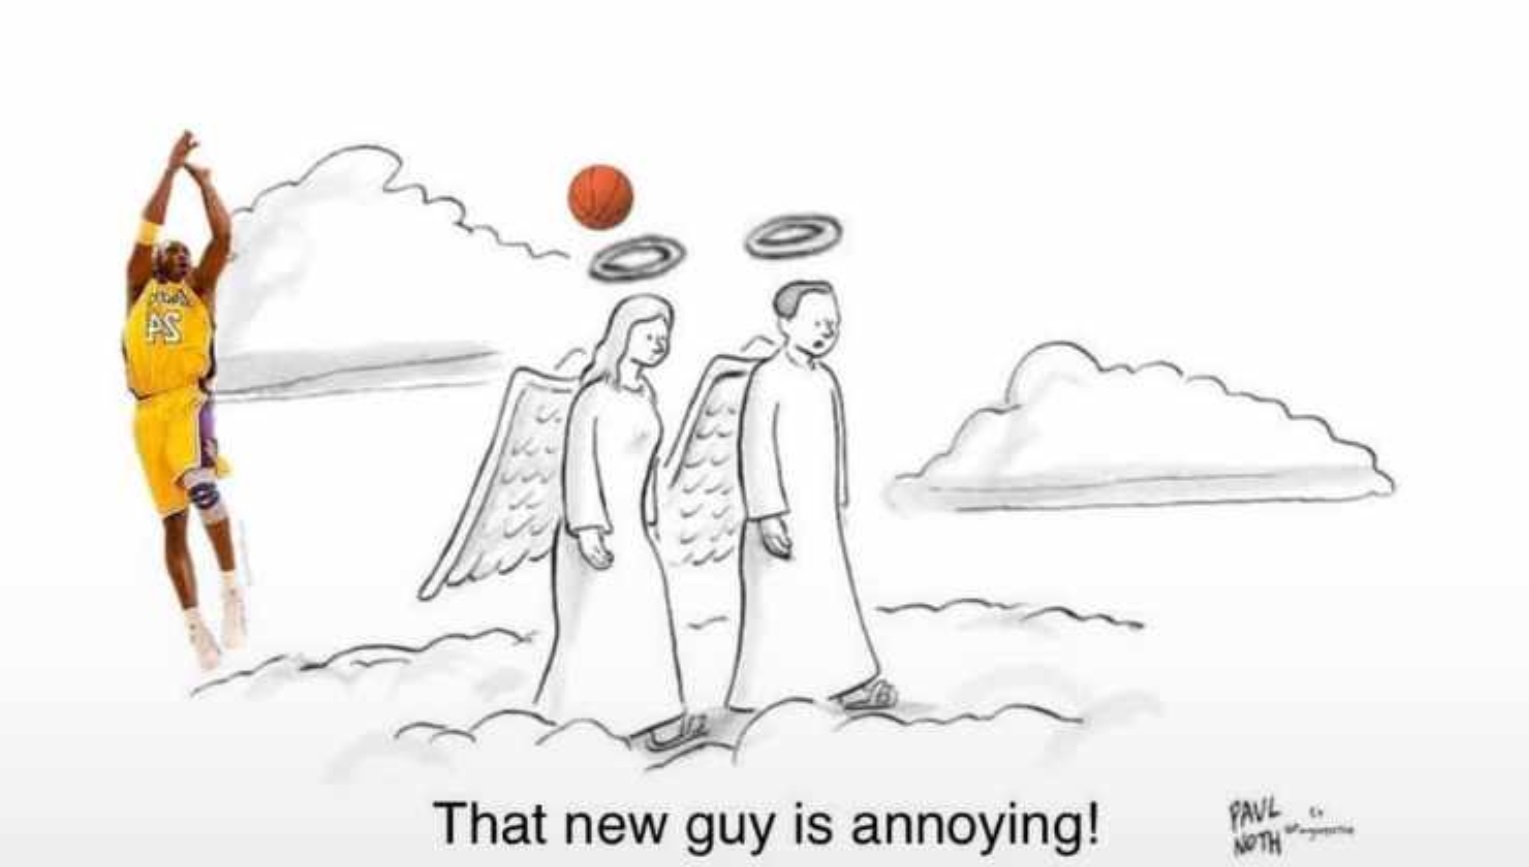 PHOTO-Angels-Saying-That-New-Guy-Is-Anno